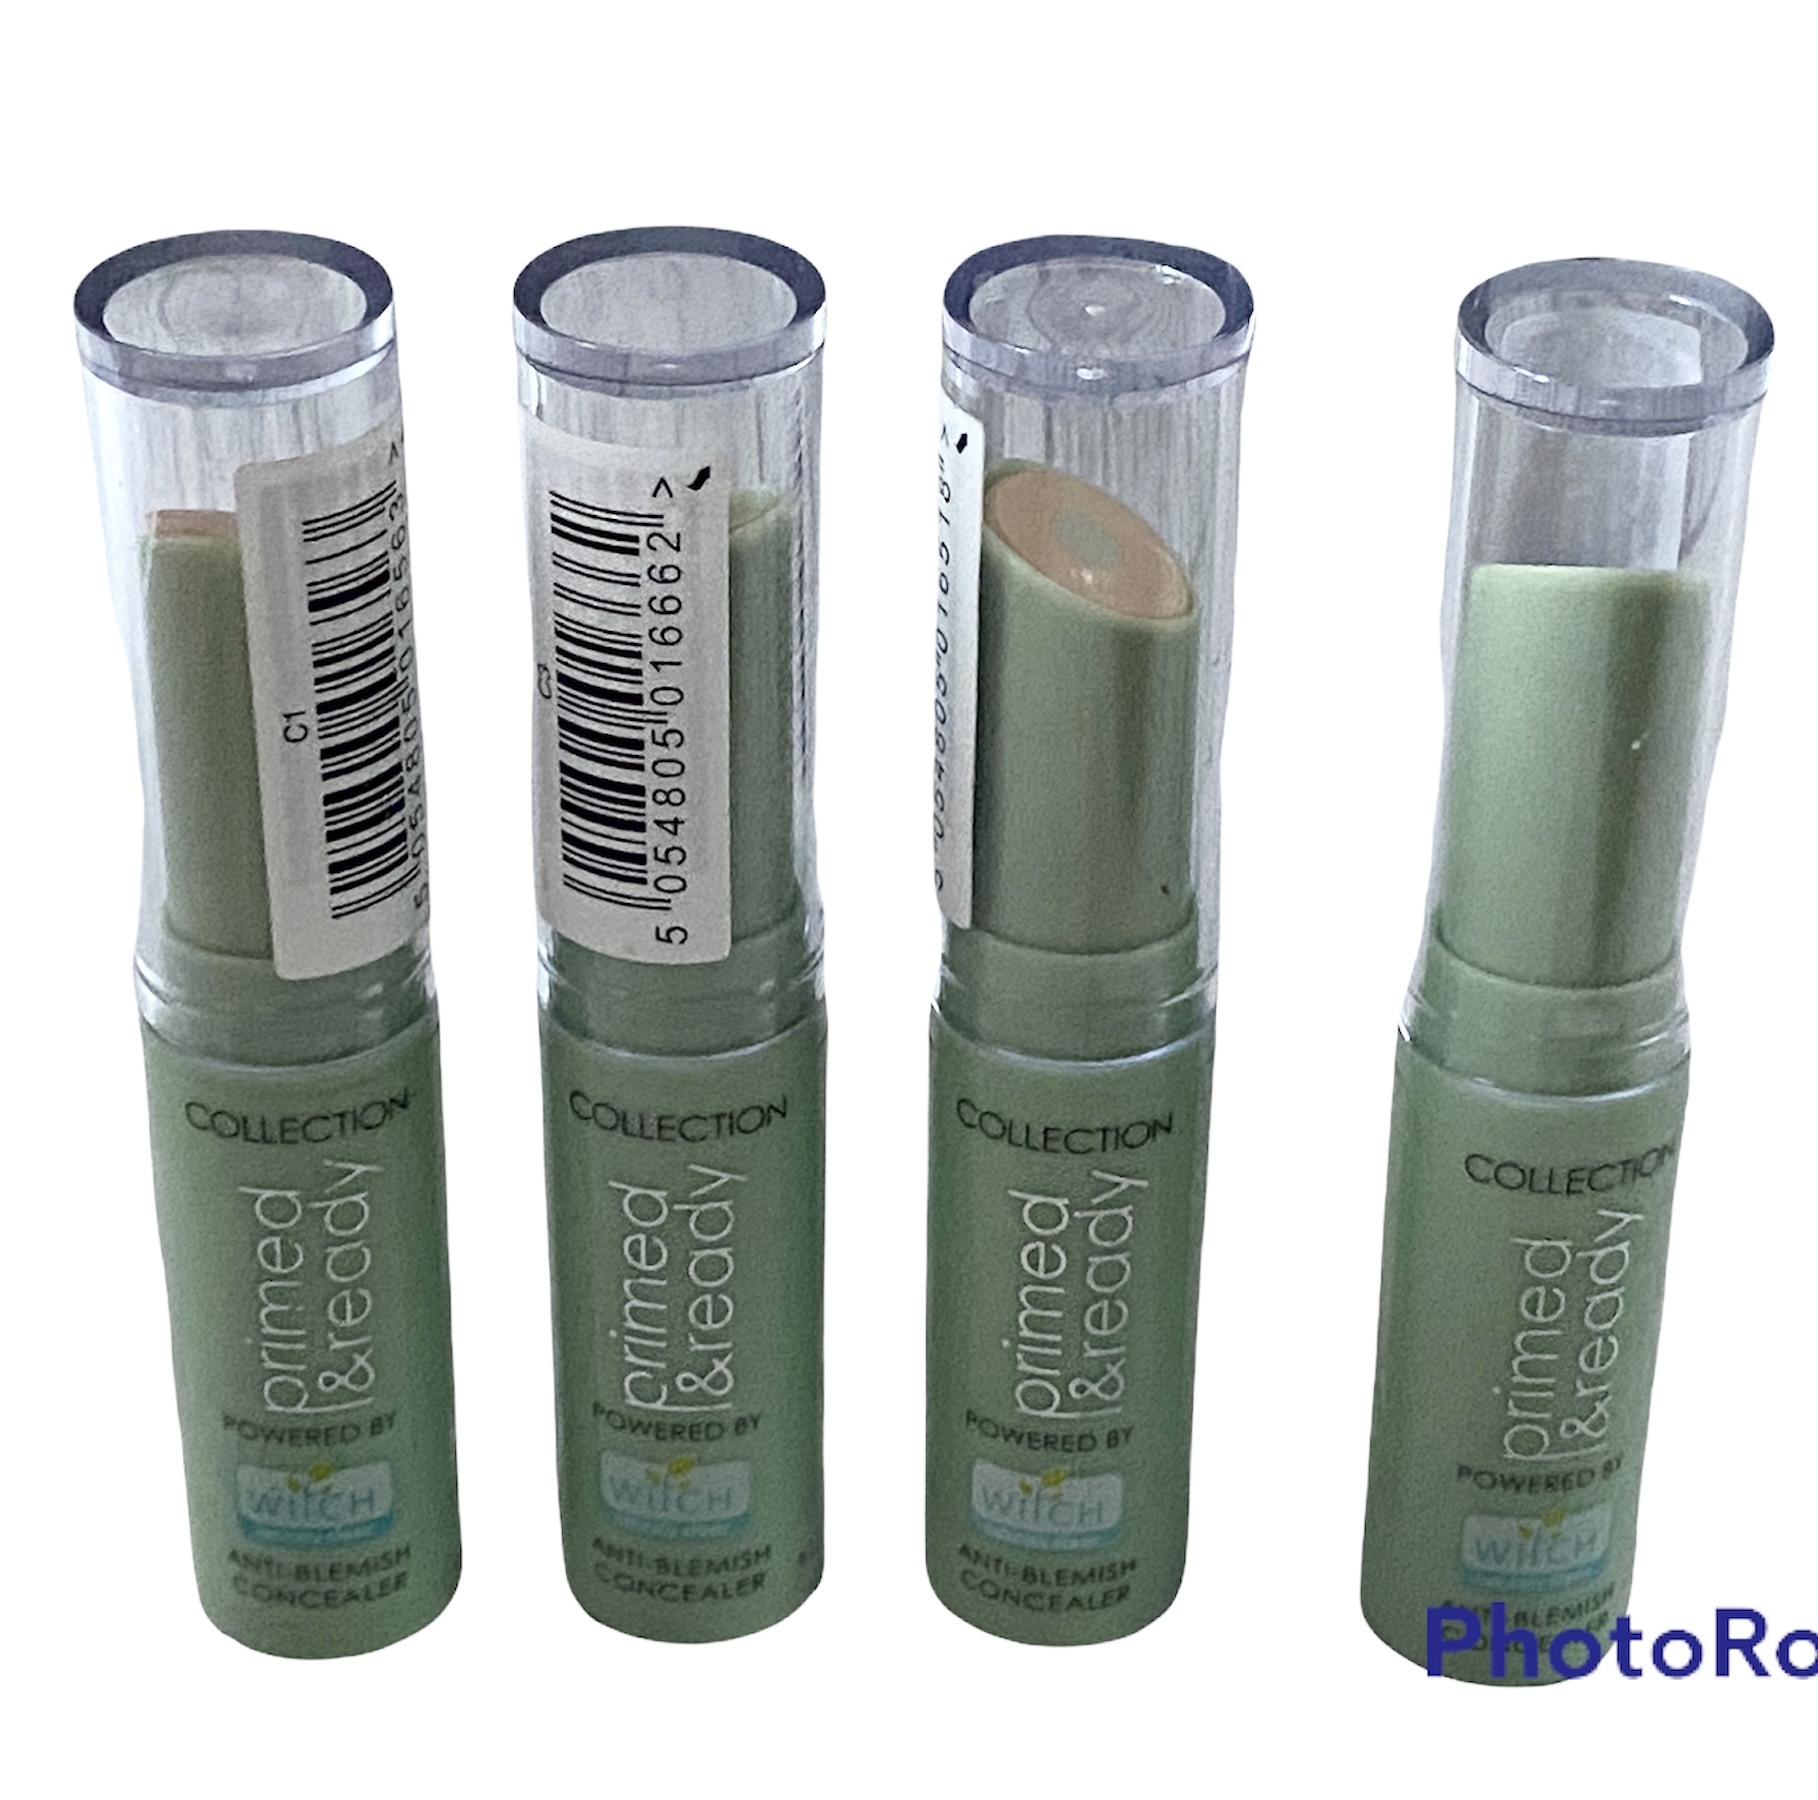 Collection Primed & Ready Anti Blemish Concealer, Light